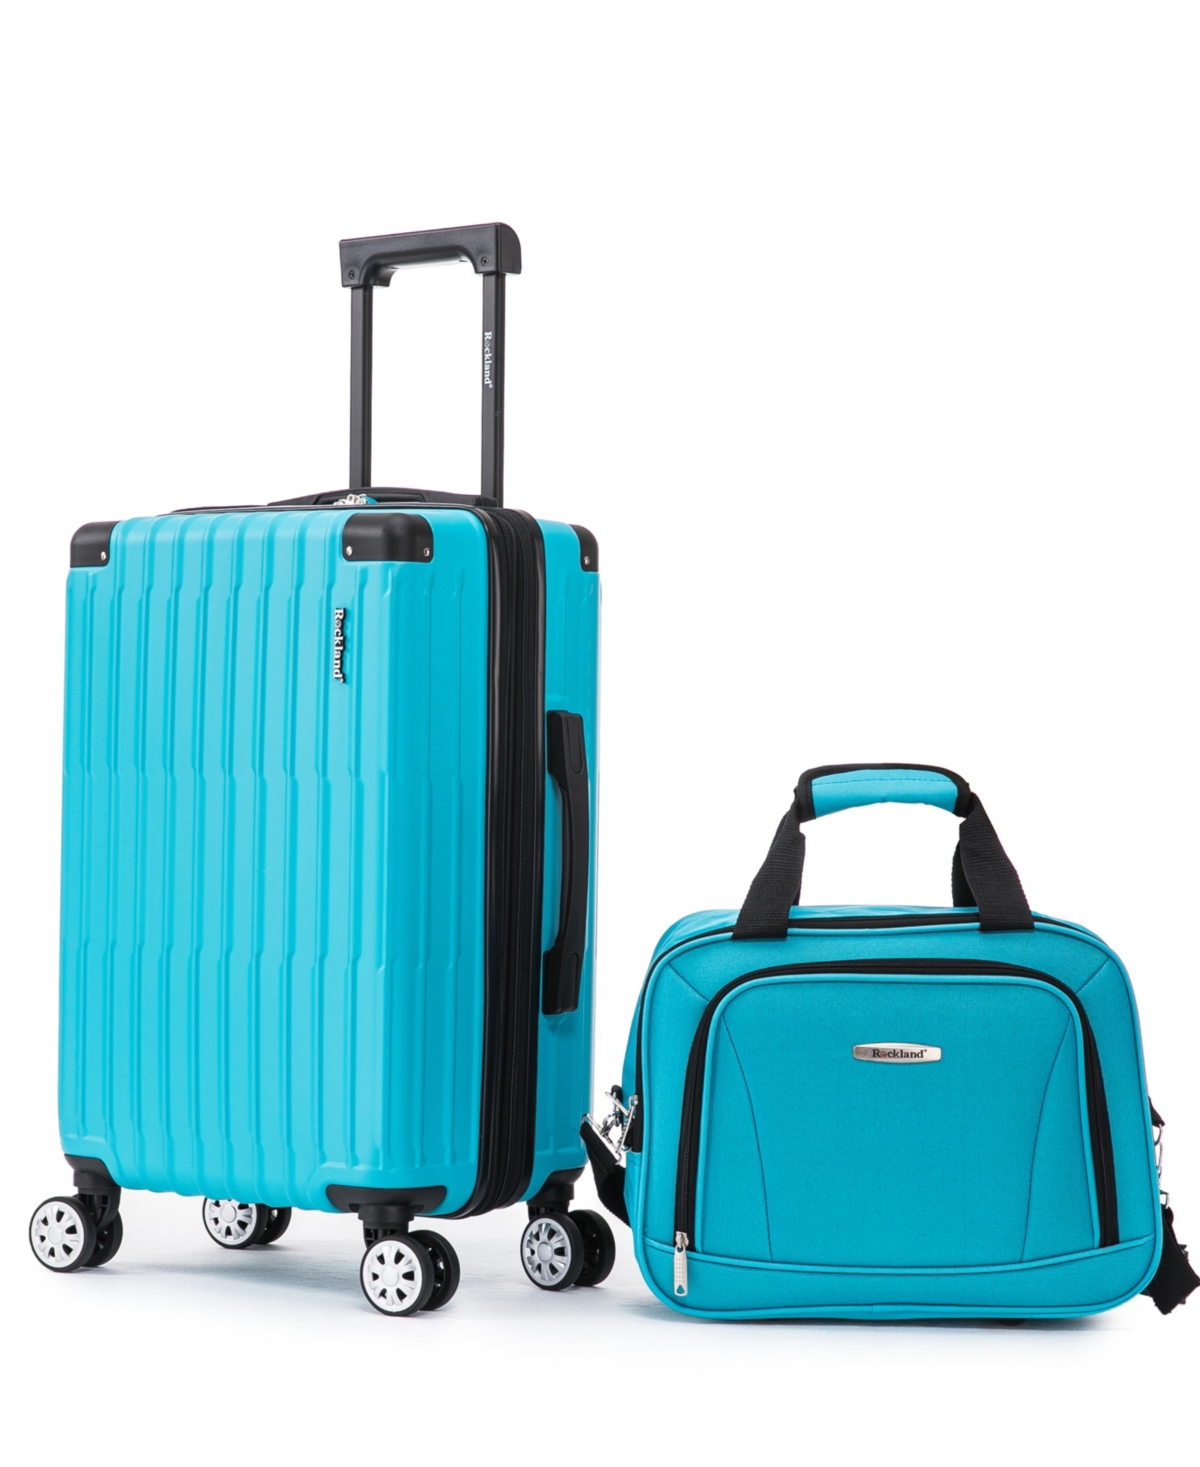 Rockland Napa Valley Luggage Set, 2 Piece In Turquoise